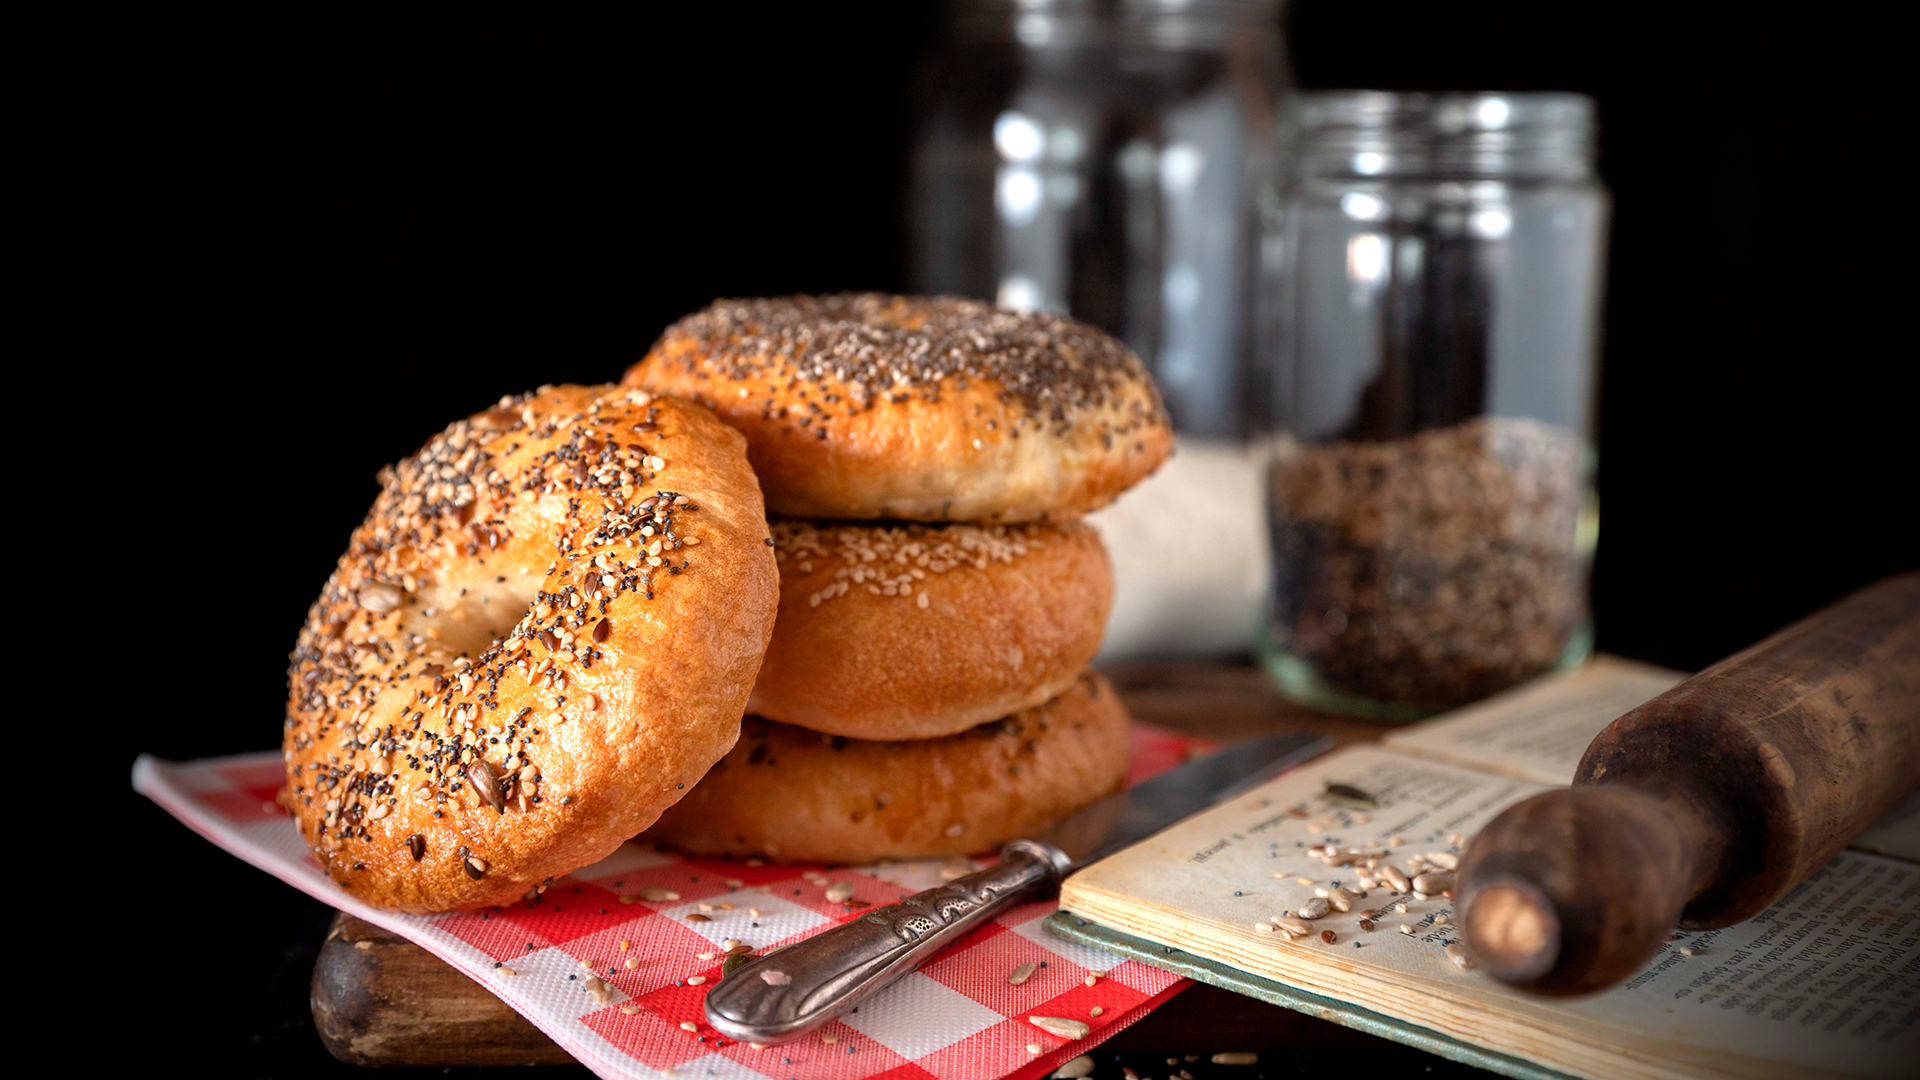 New York-style bagels